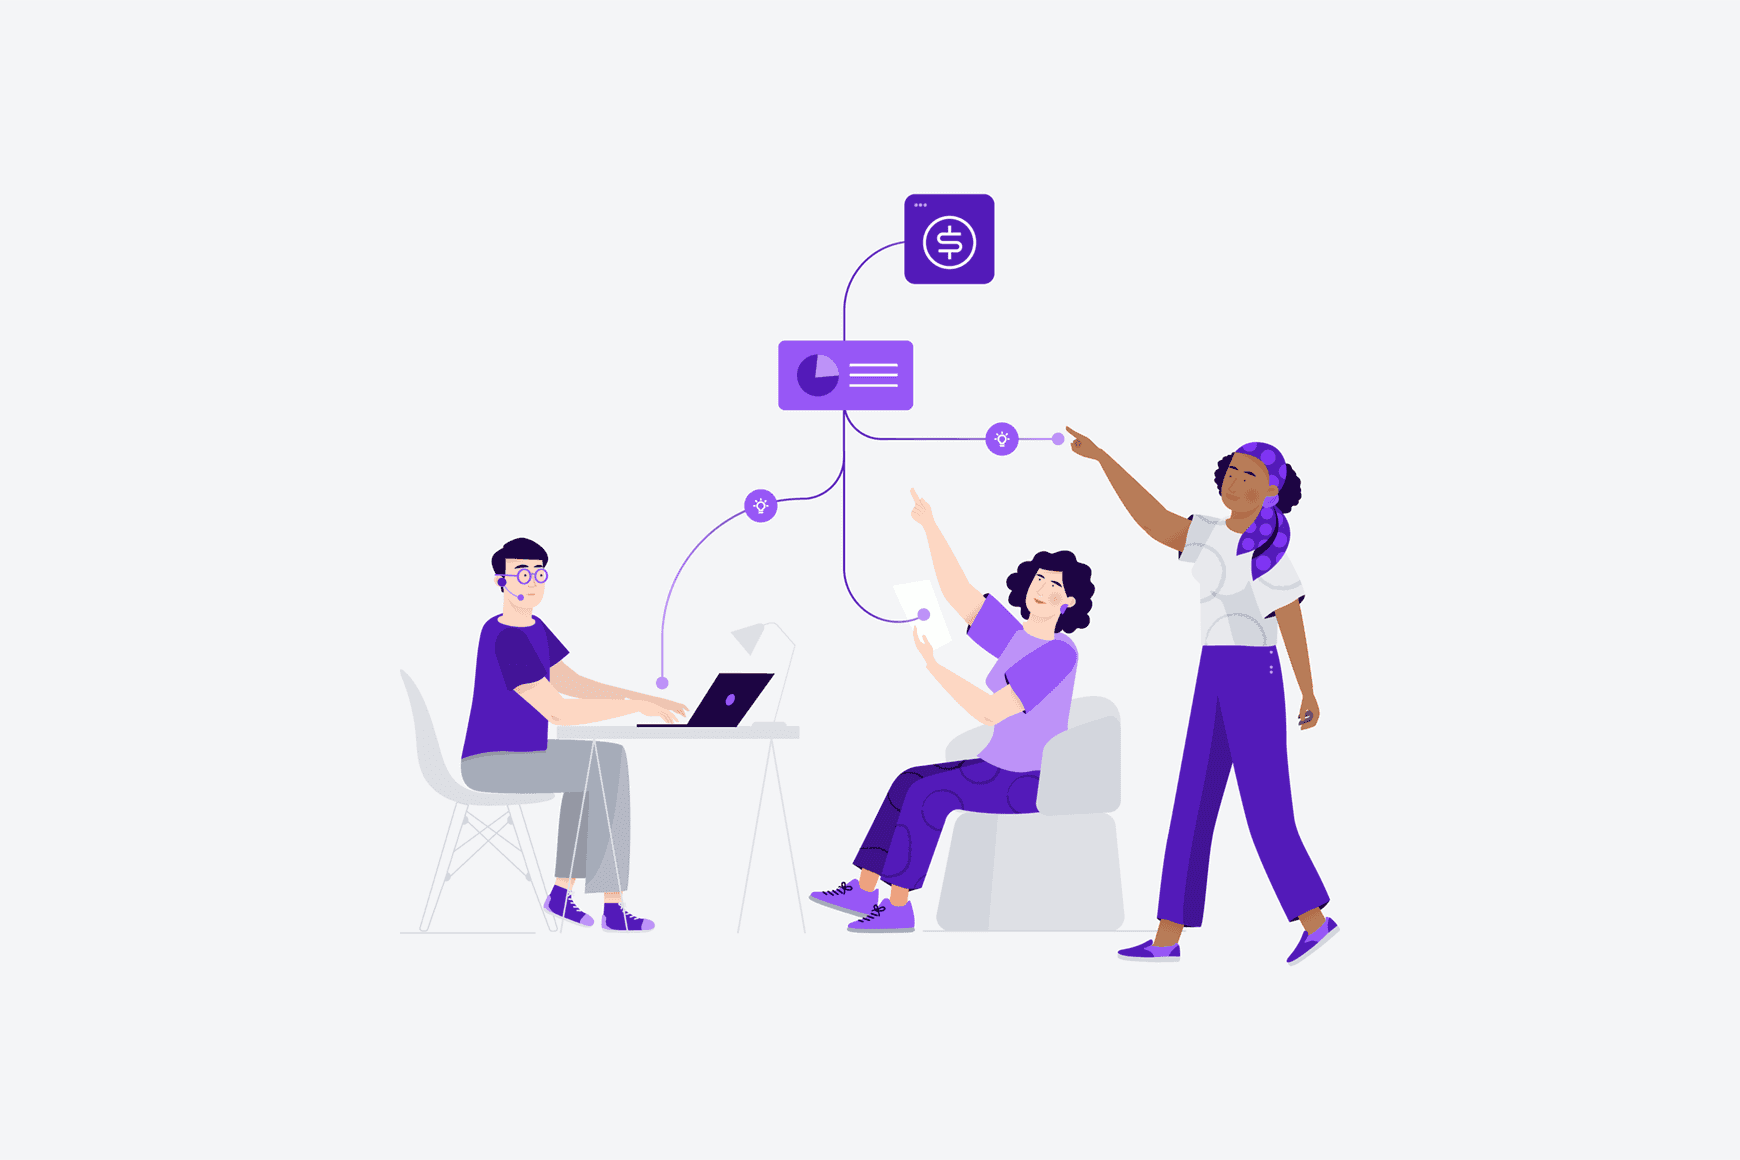 Talkdesk AppConnect catalog: Level up your contact center capabilities